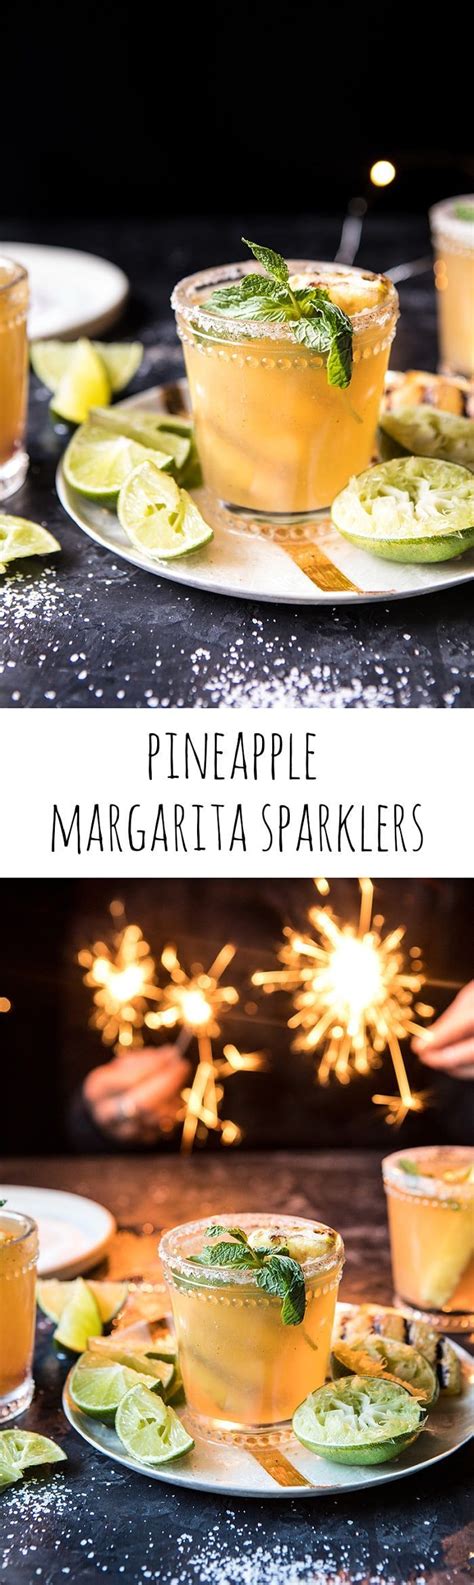 Pineapple Margarita Sparklers Recipe With Images